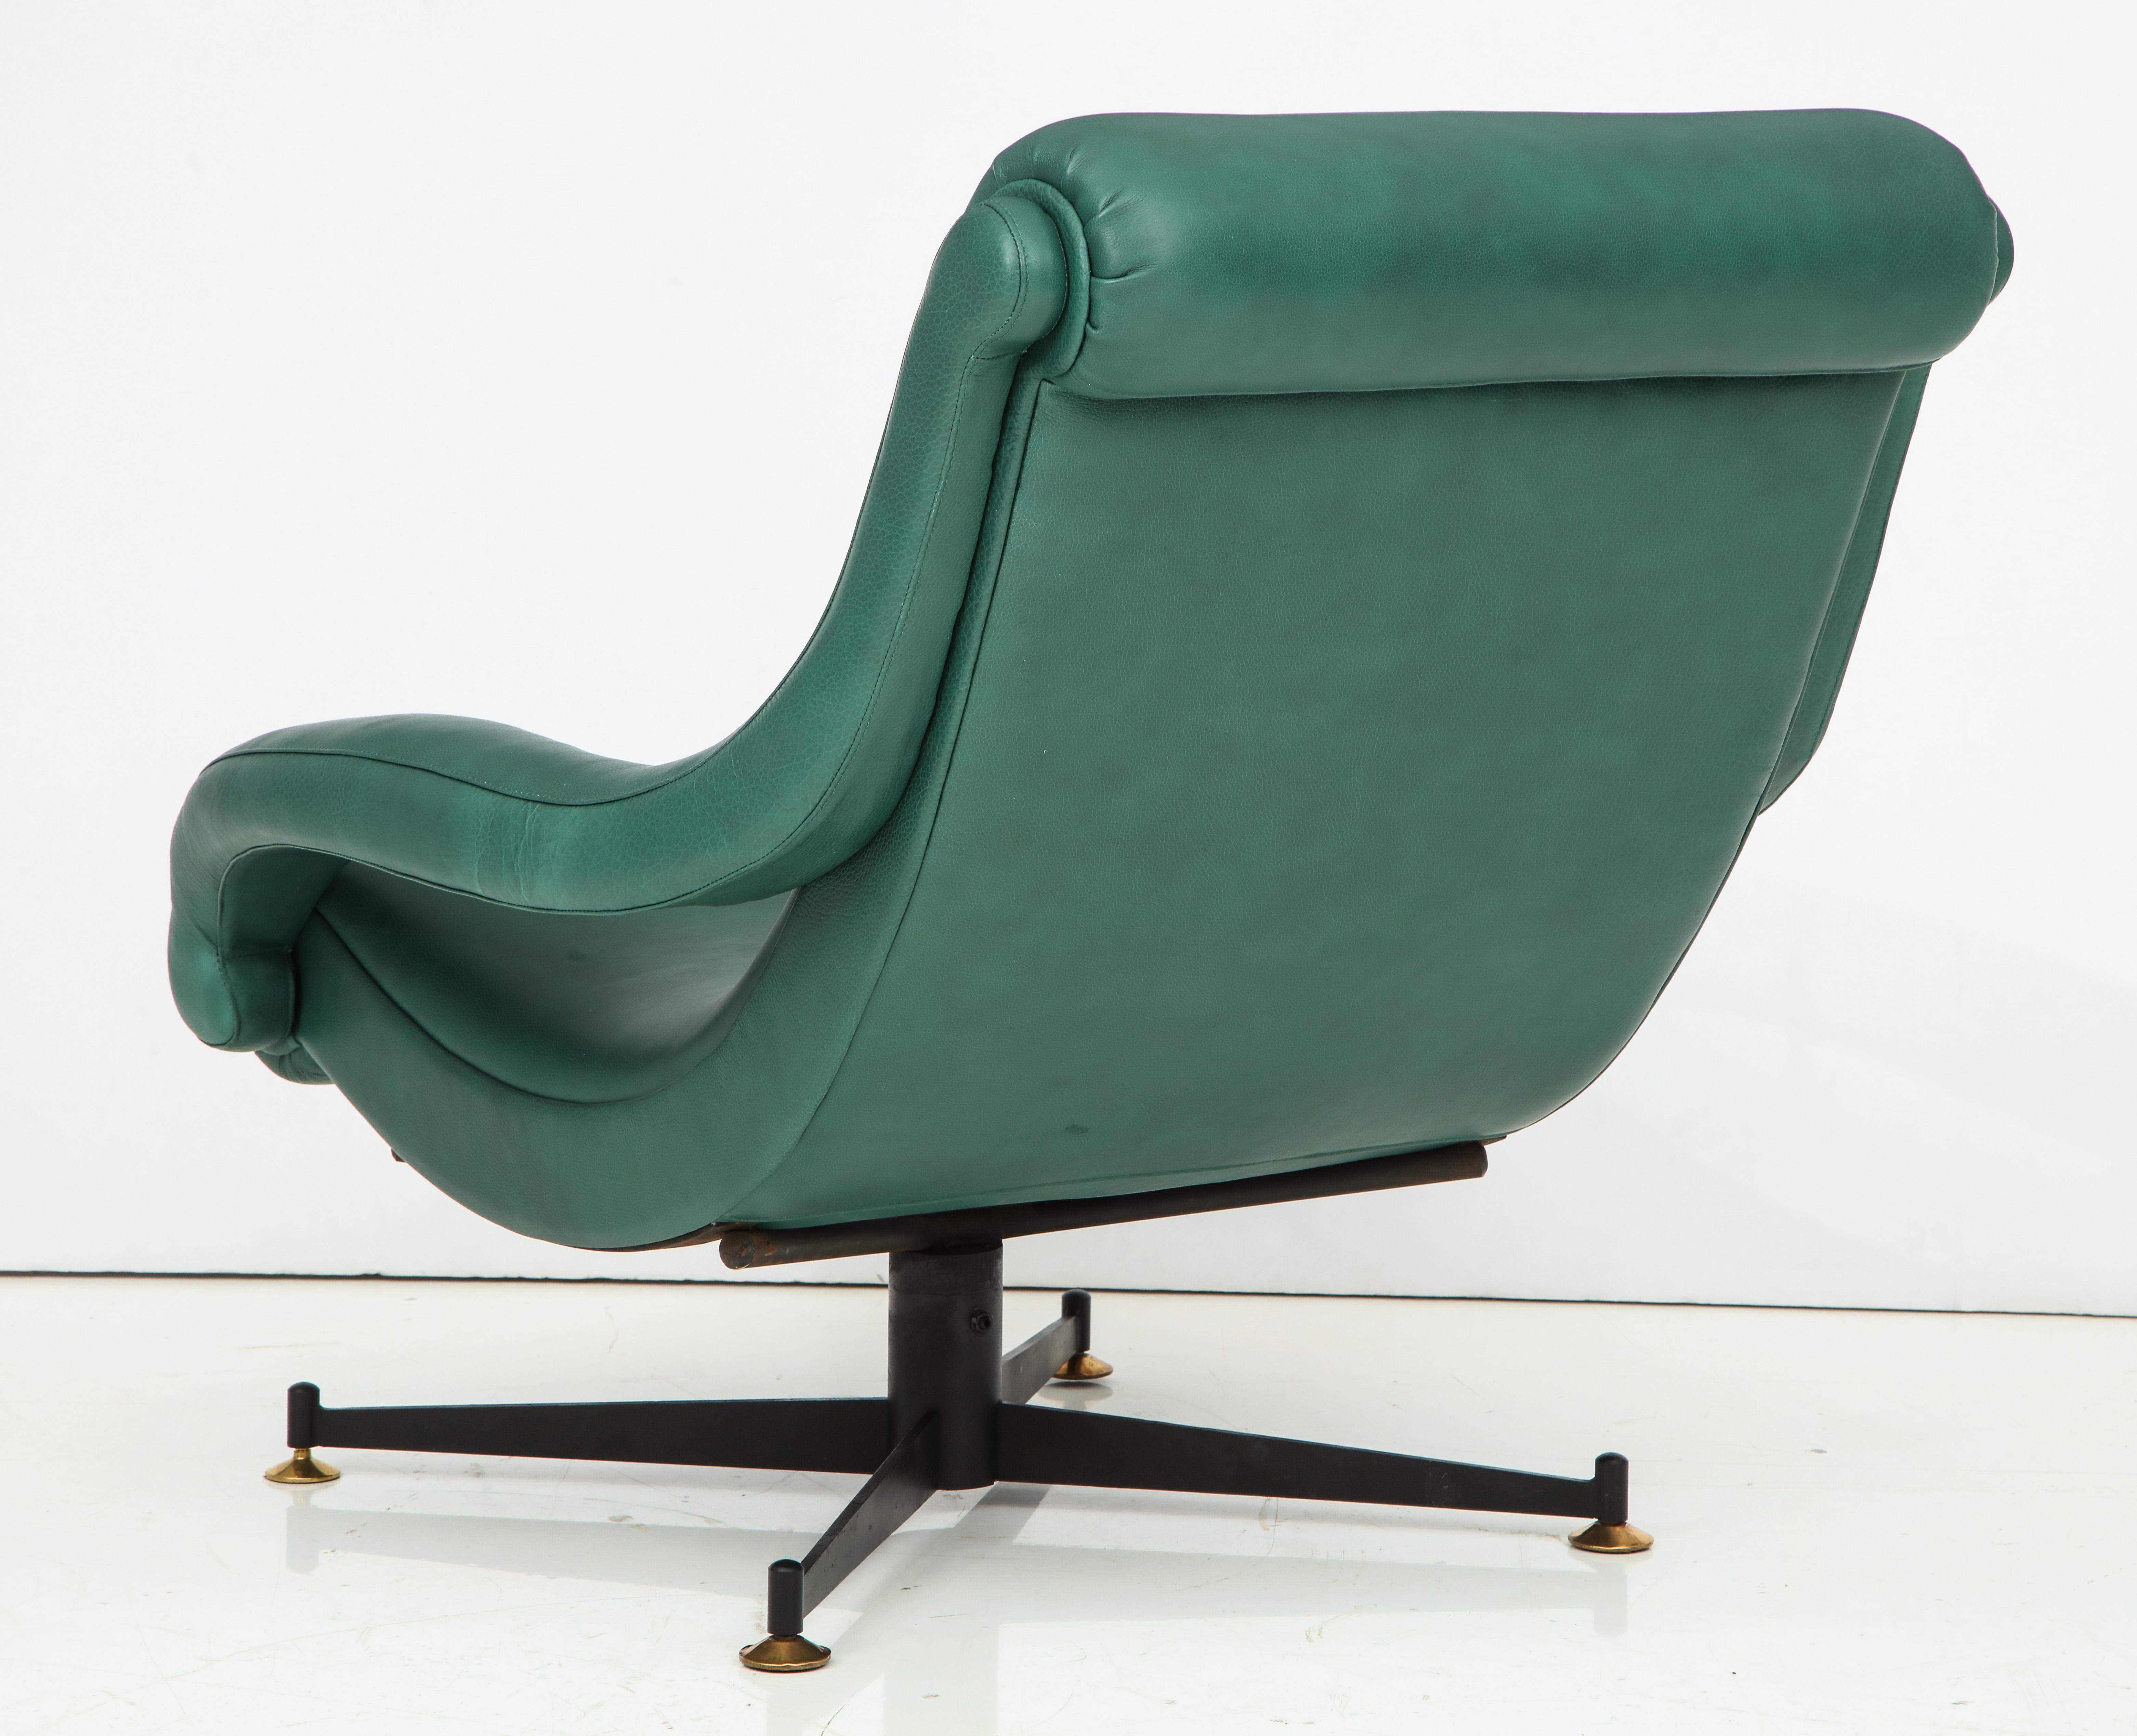 Pair of Lounge Chairs in Gucci Green Leather by Radice for Lenzi, c. 1950, Italy 2